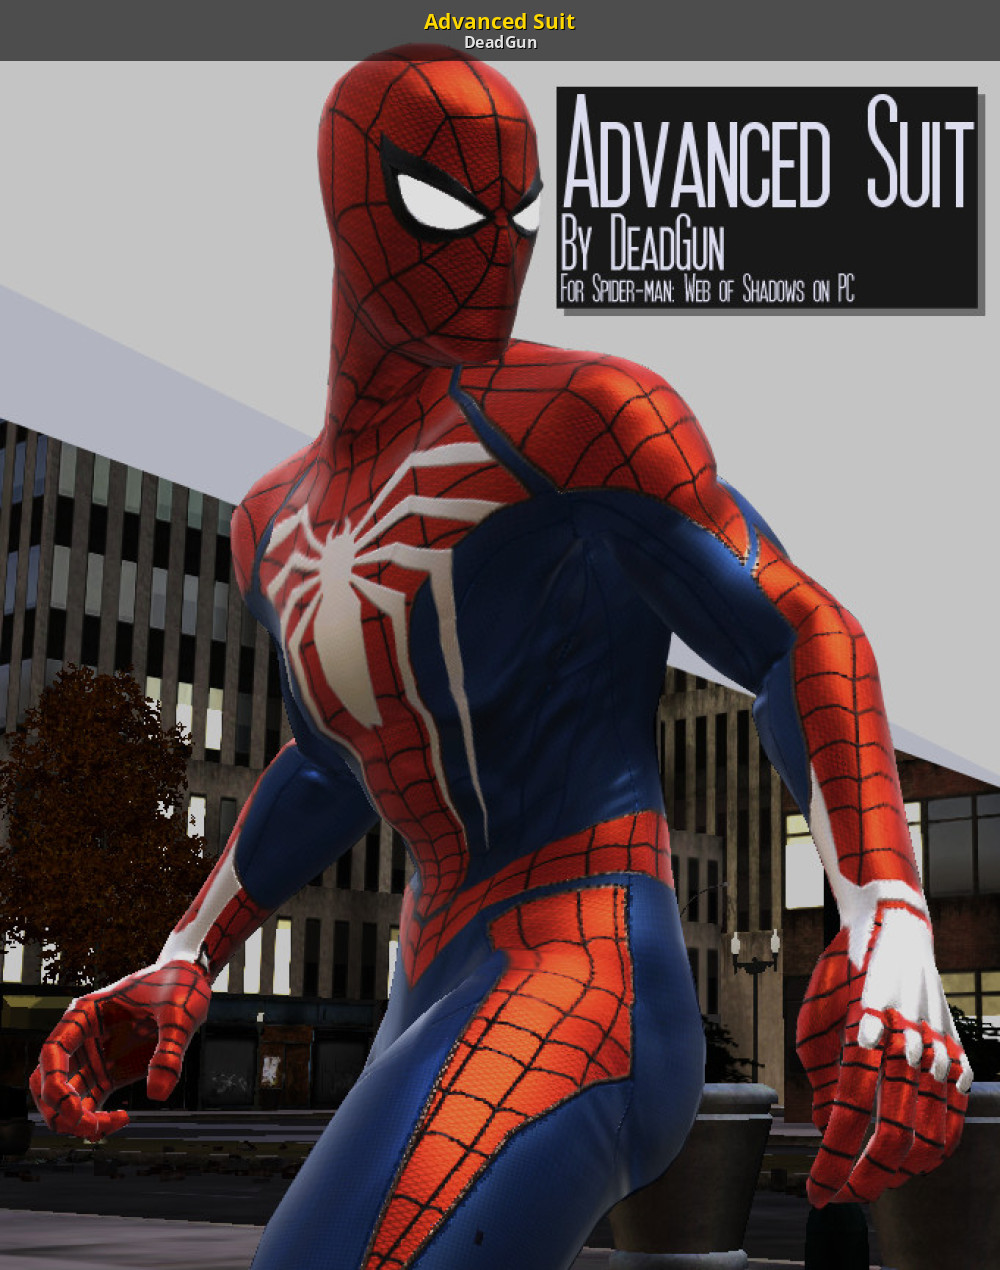 Spider-Man Web Of Shadows [PC MOD] PS4 Spider-Punk Suits (+